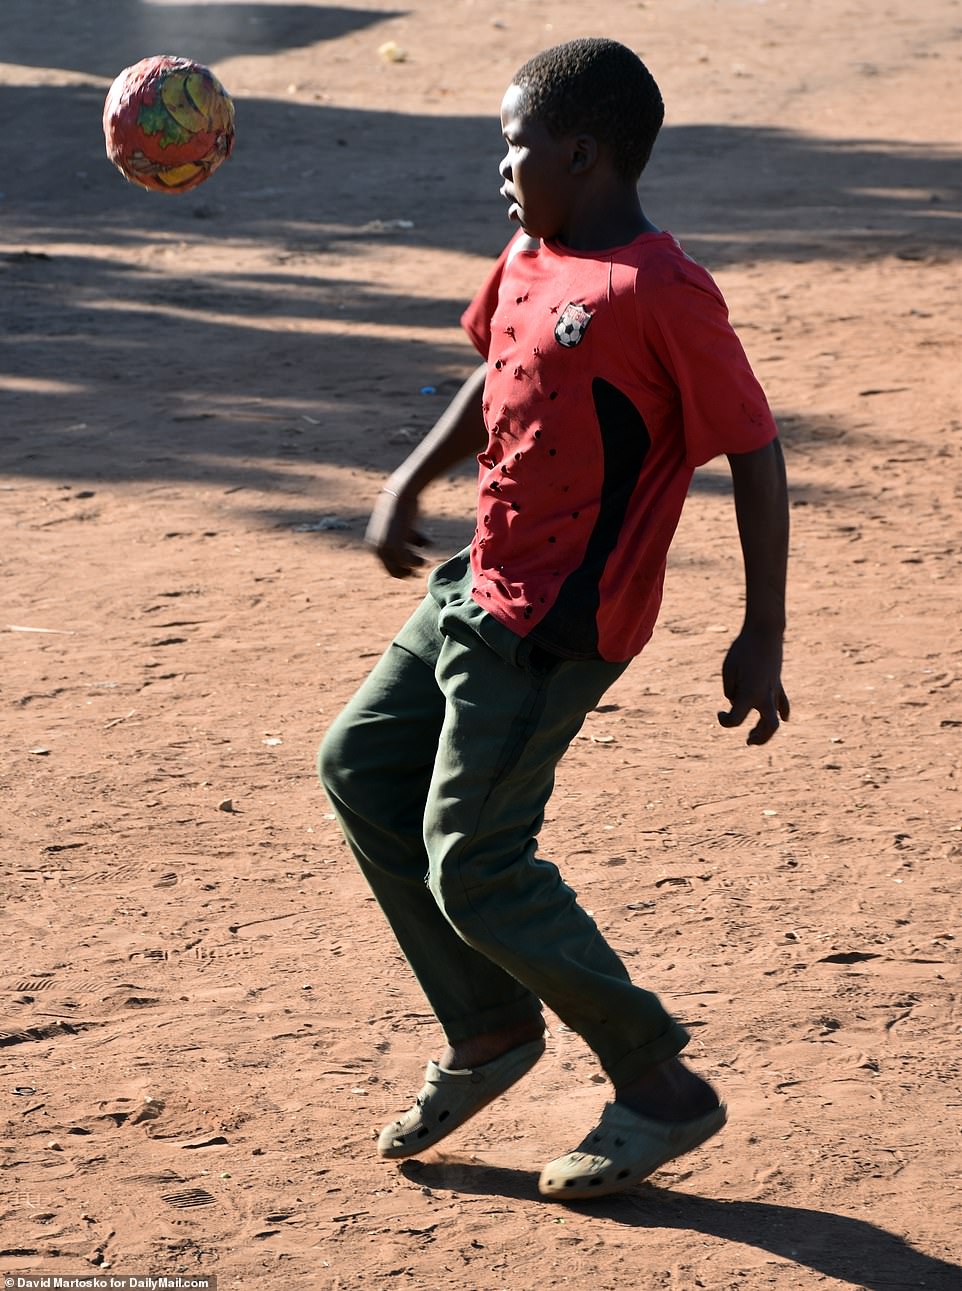 Soccer is the number one sport in in Lusaka